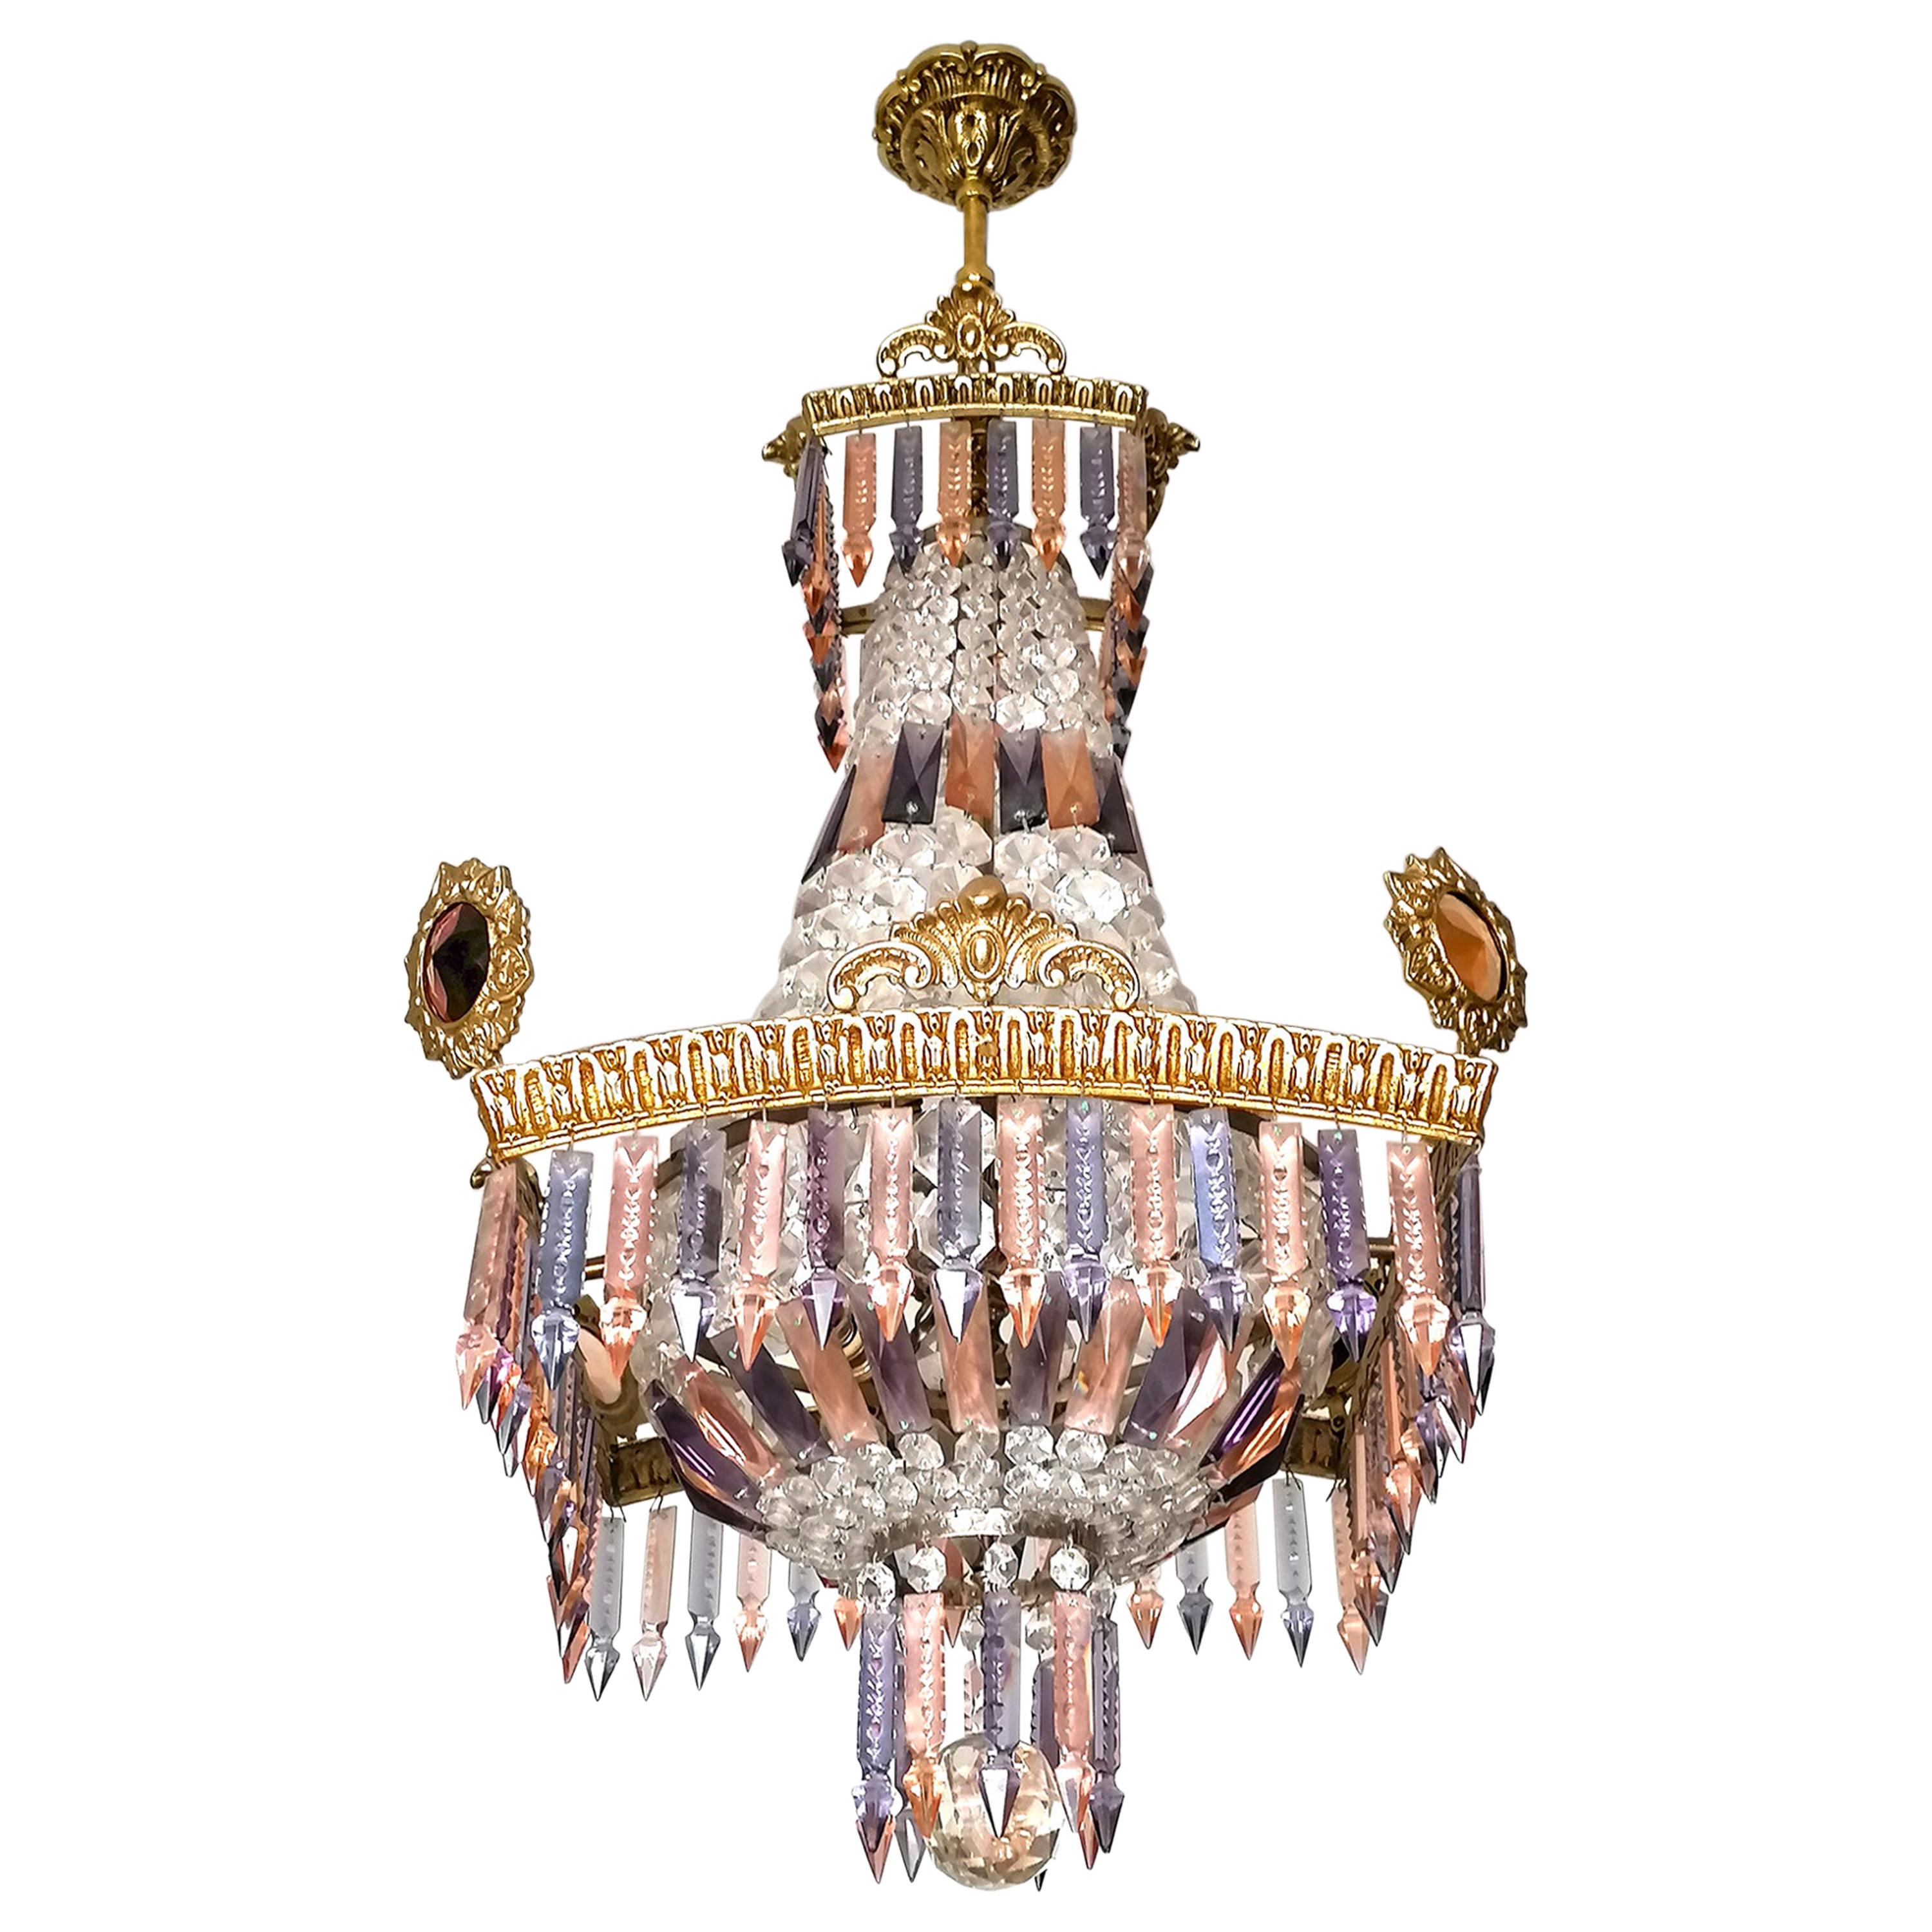 Luxury French Empire Regency Louis XV Pink & Plum Crystal Gilt Bronze Chandelier For Sale